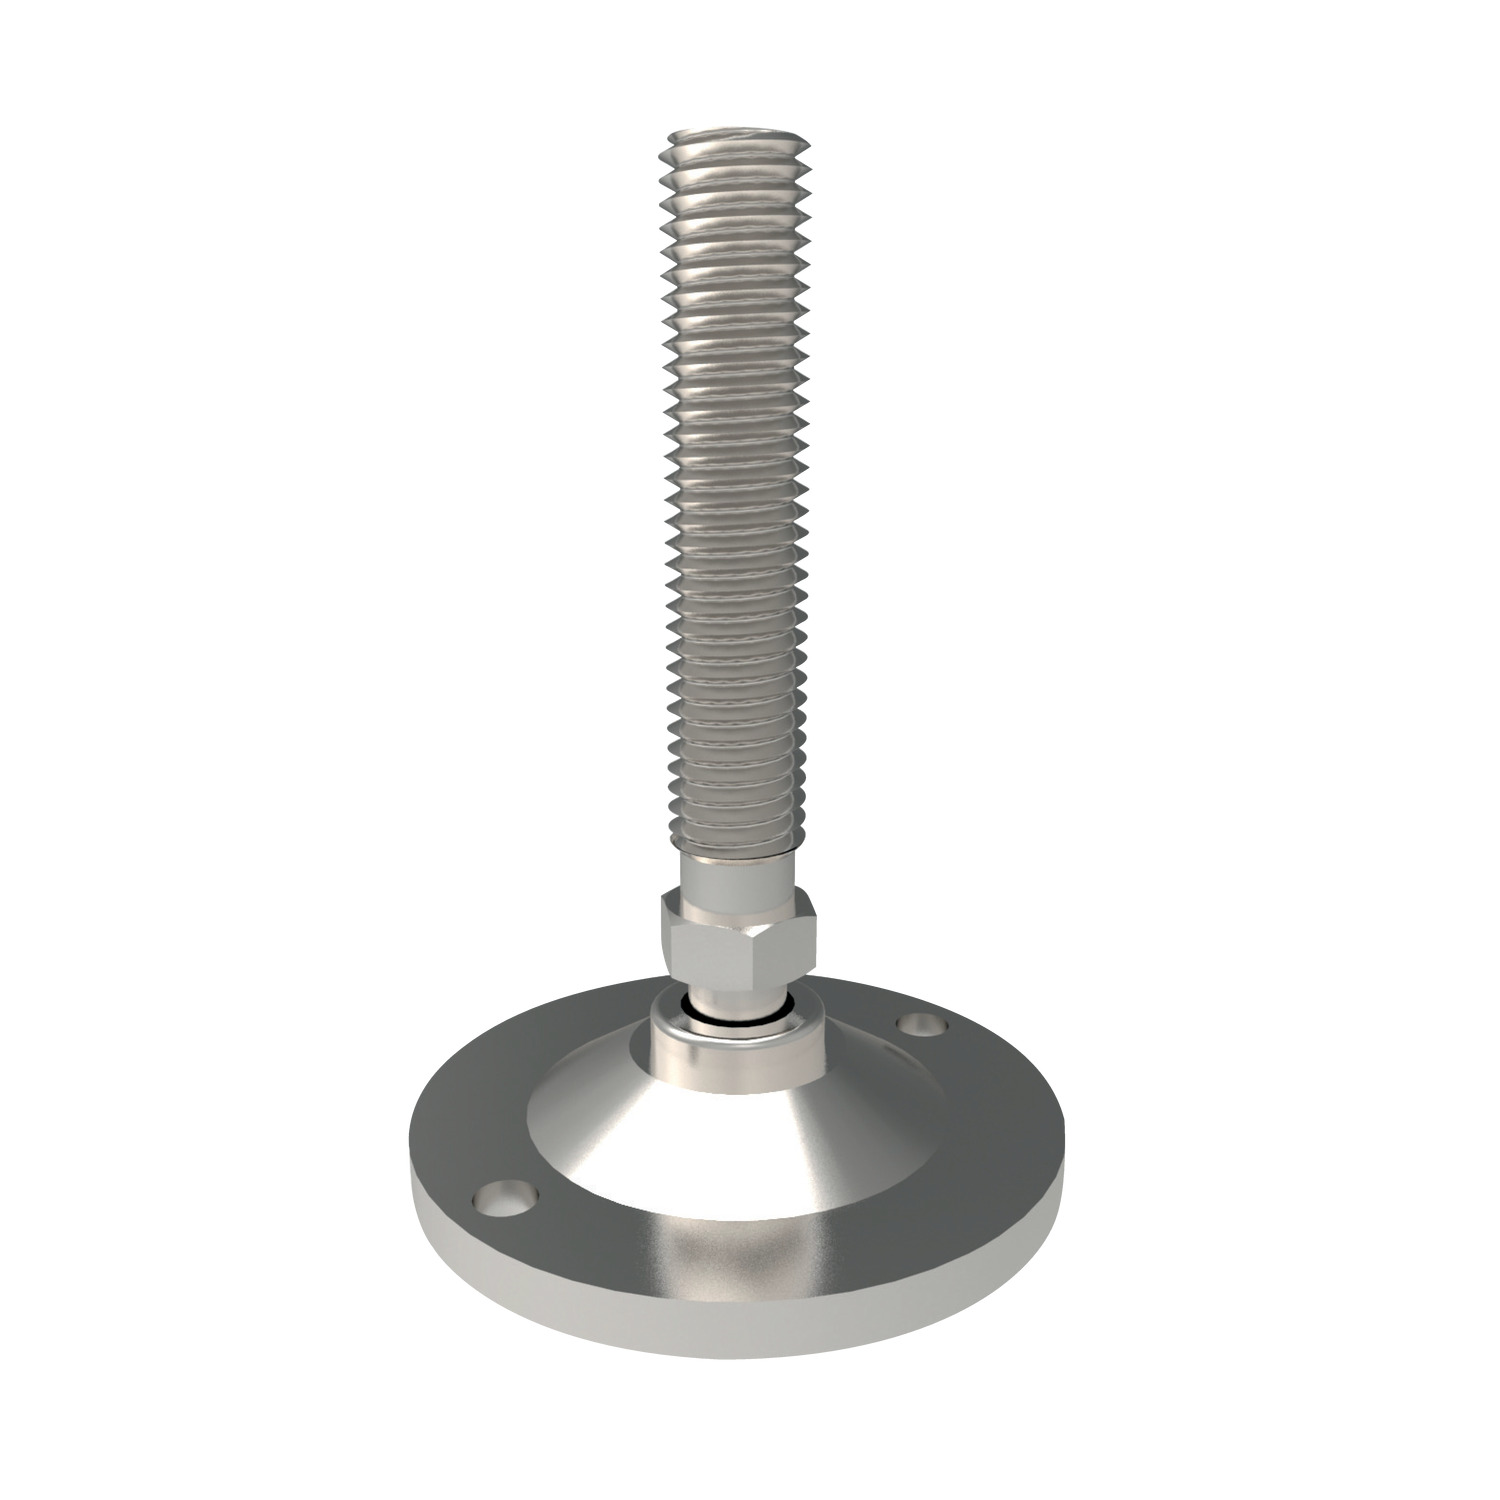 Product 34712, Levelling Feet - Bolt Down, Medium Duty pad and bolt stainless steel / 